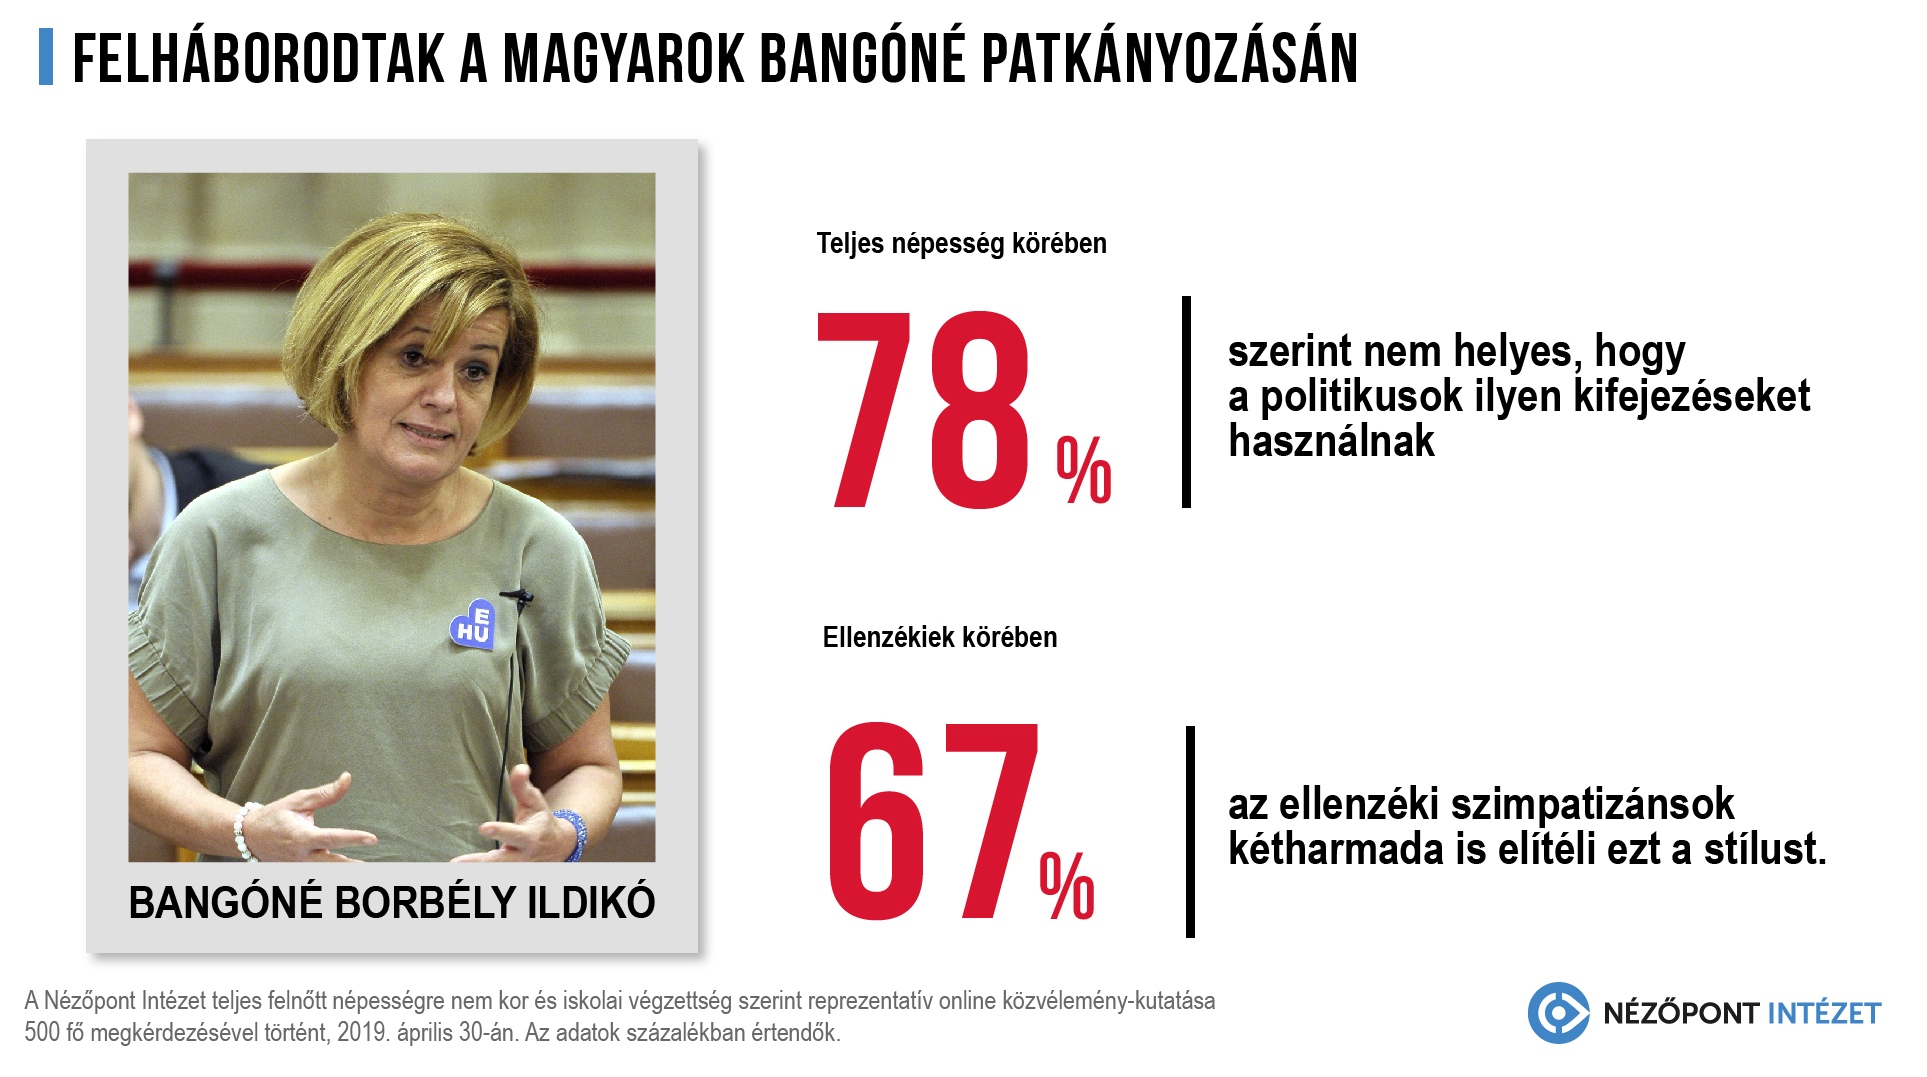 TWO THIRDS OF THE OPPOSITION WO THIRDS OF THE OPPOSITION VOTERS DISAPPROVES OF BANGÓNÉ’S STYLE